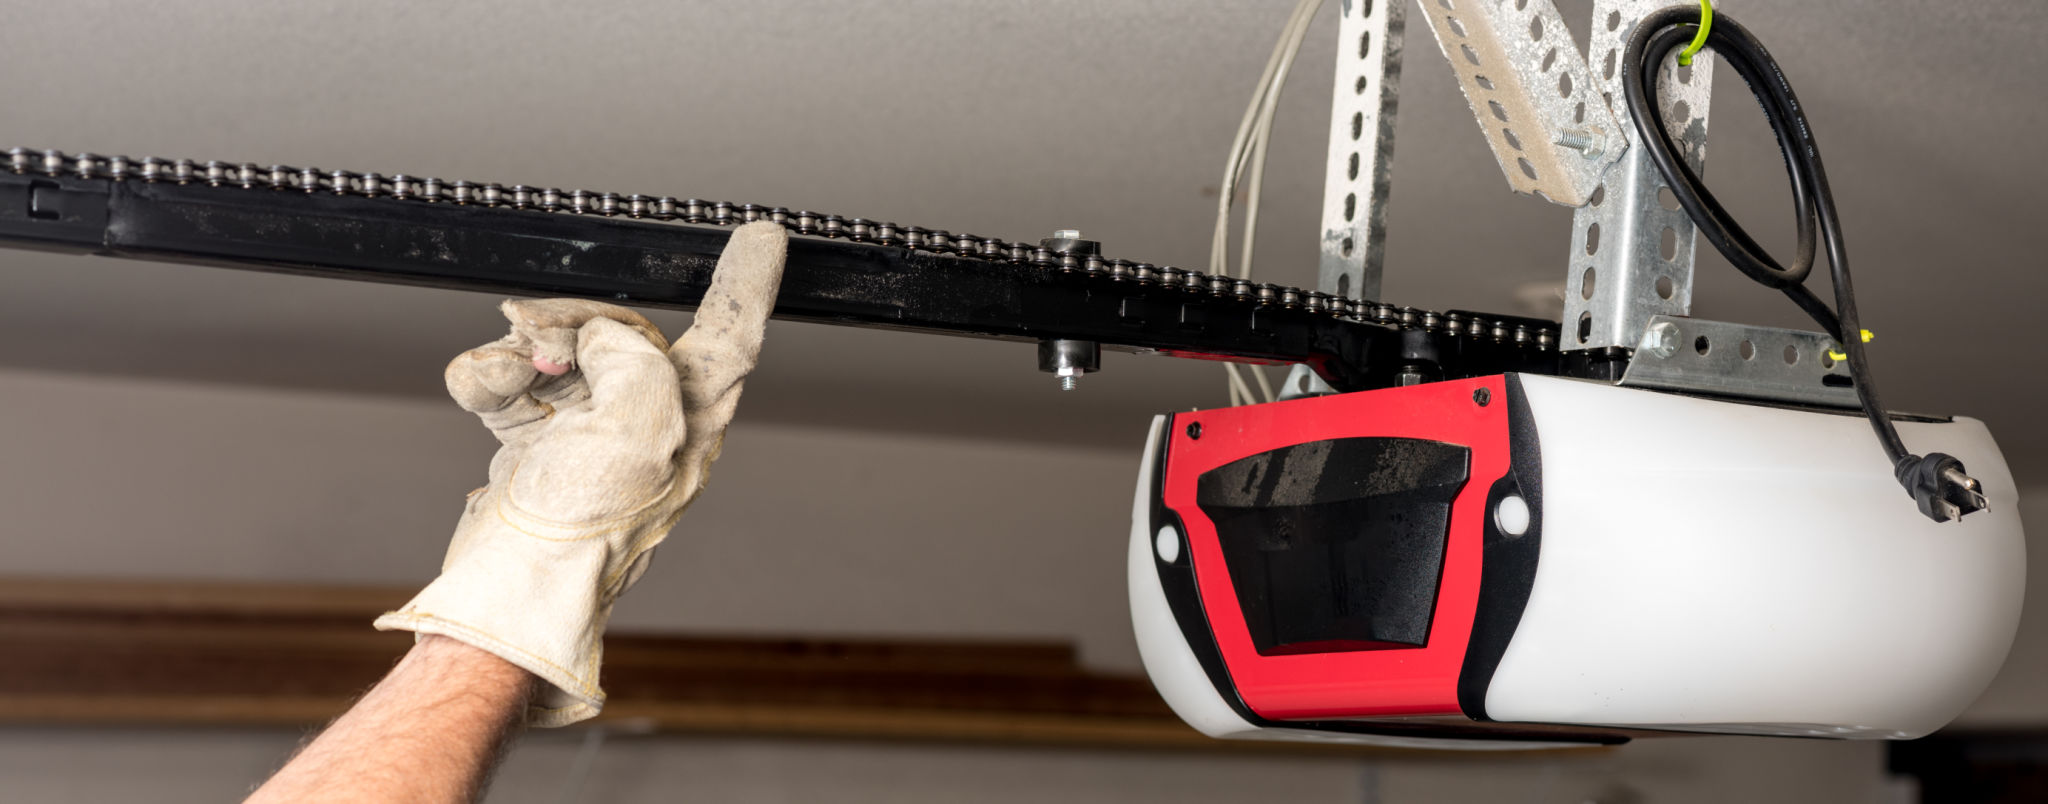 Garage Door Chain Replacement and lubrication